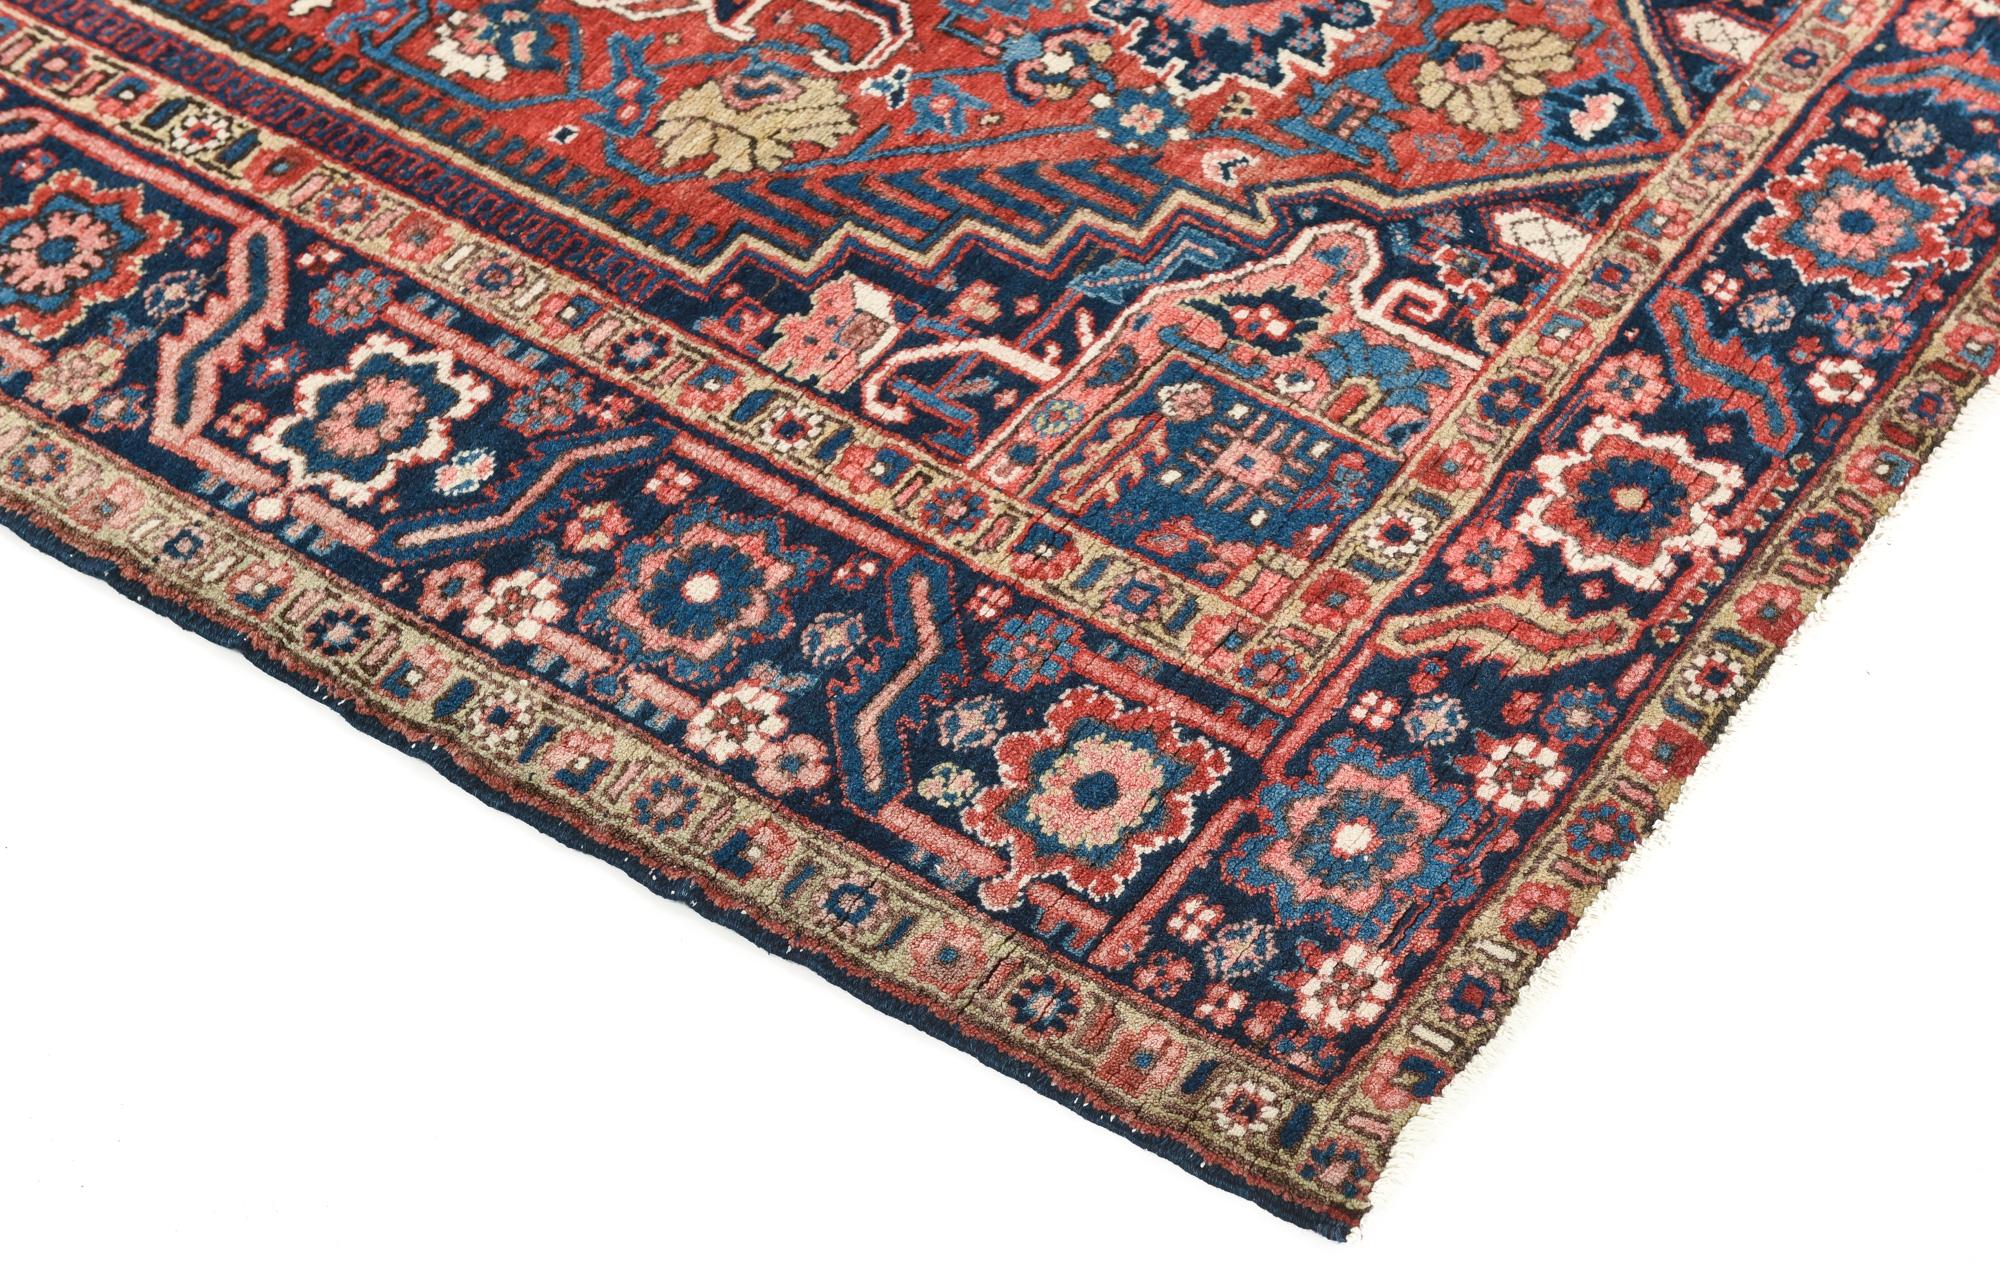 Hand-Knotted Vibrant Color Palette Semi-Antique Persian Heriz Rug  4'8